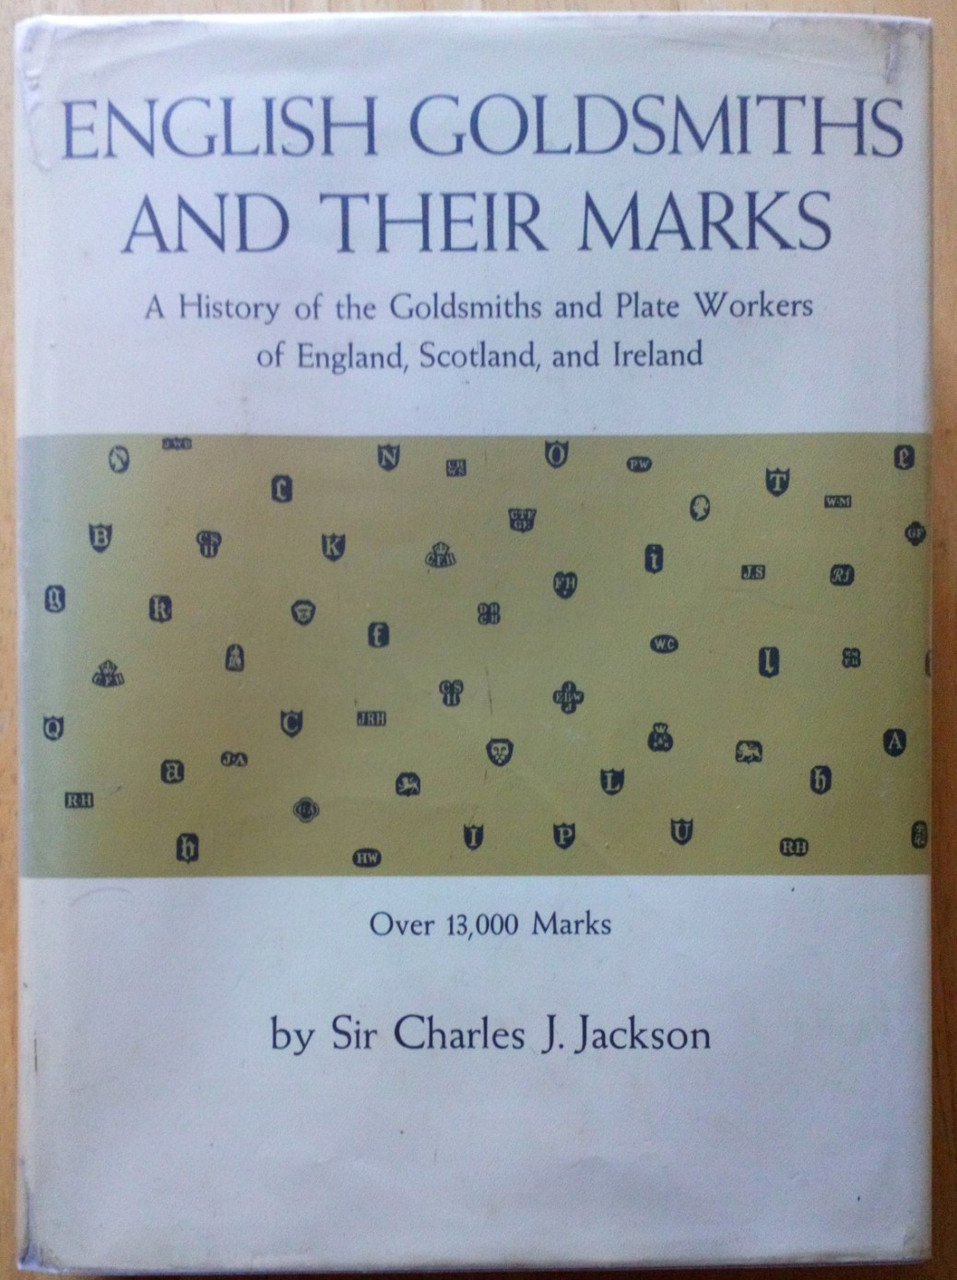 Jackson, Charles J  - English Goldsmiths and Their Marks : A History Of The Goldsmiths and Plate Workers of England, Scotland and Ireland  HB